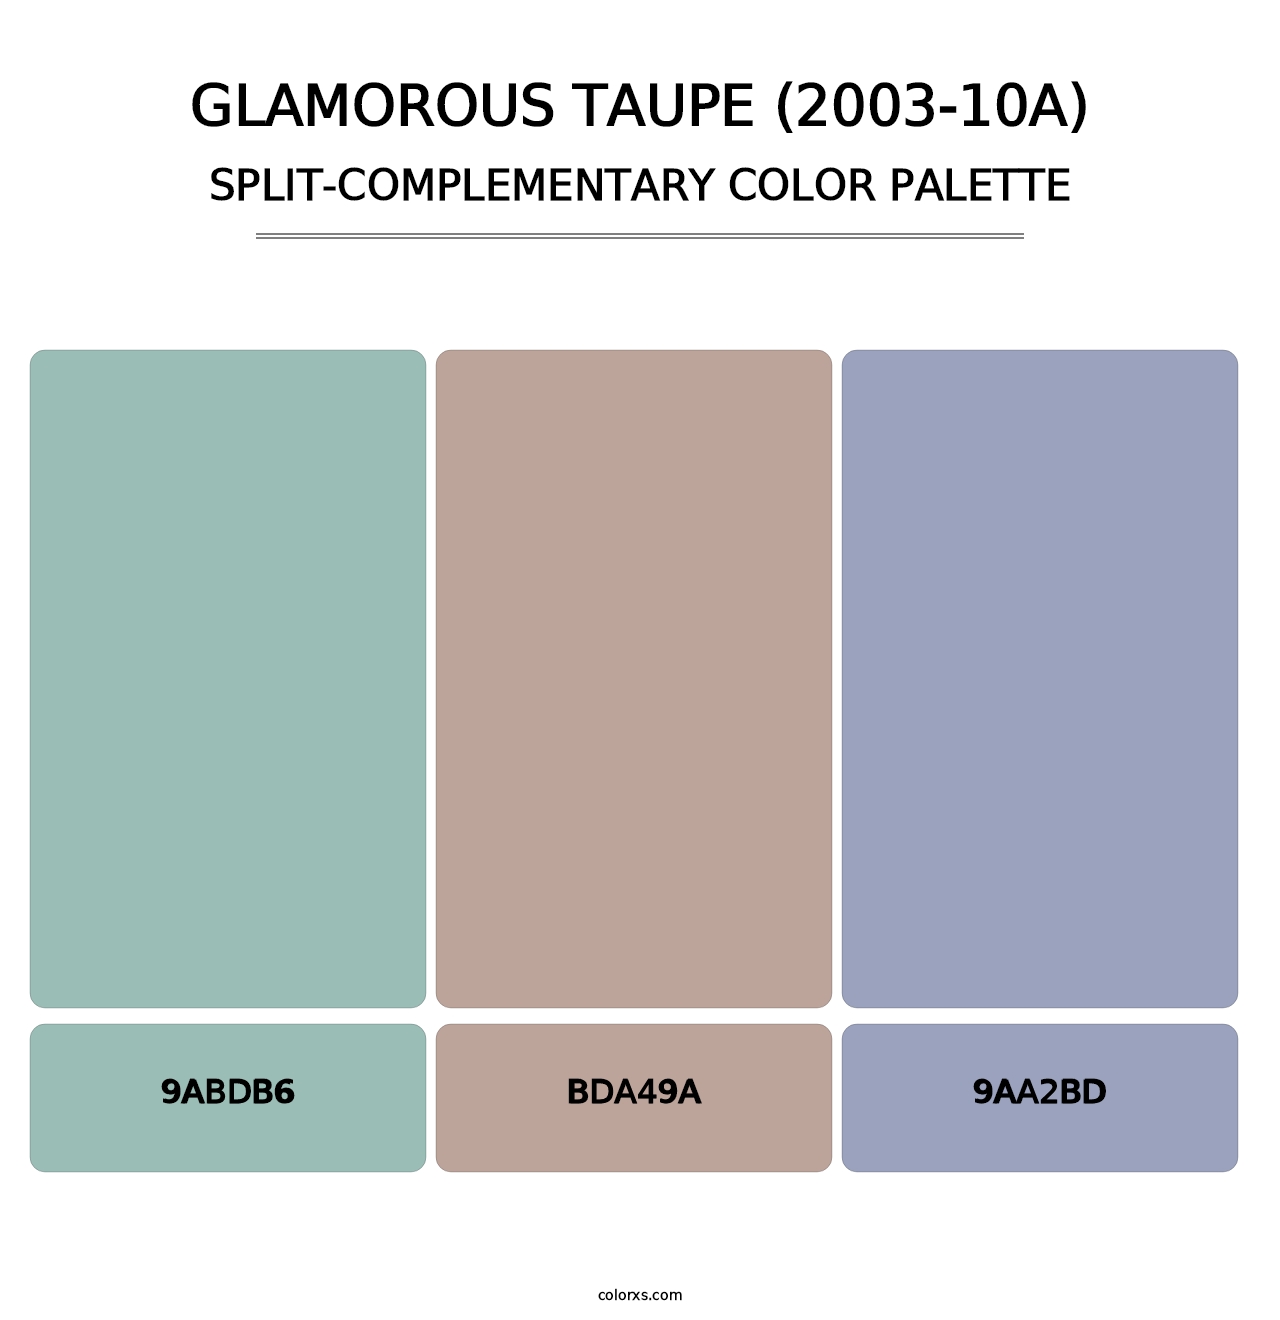 Glamorous Taupe (2003-10A) - Split-Complementary Color Palette